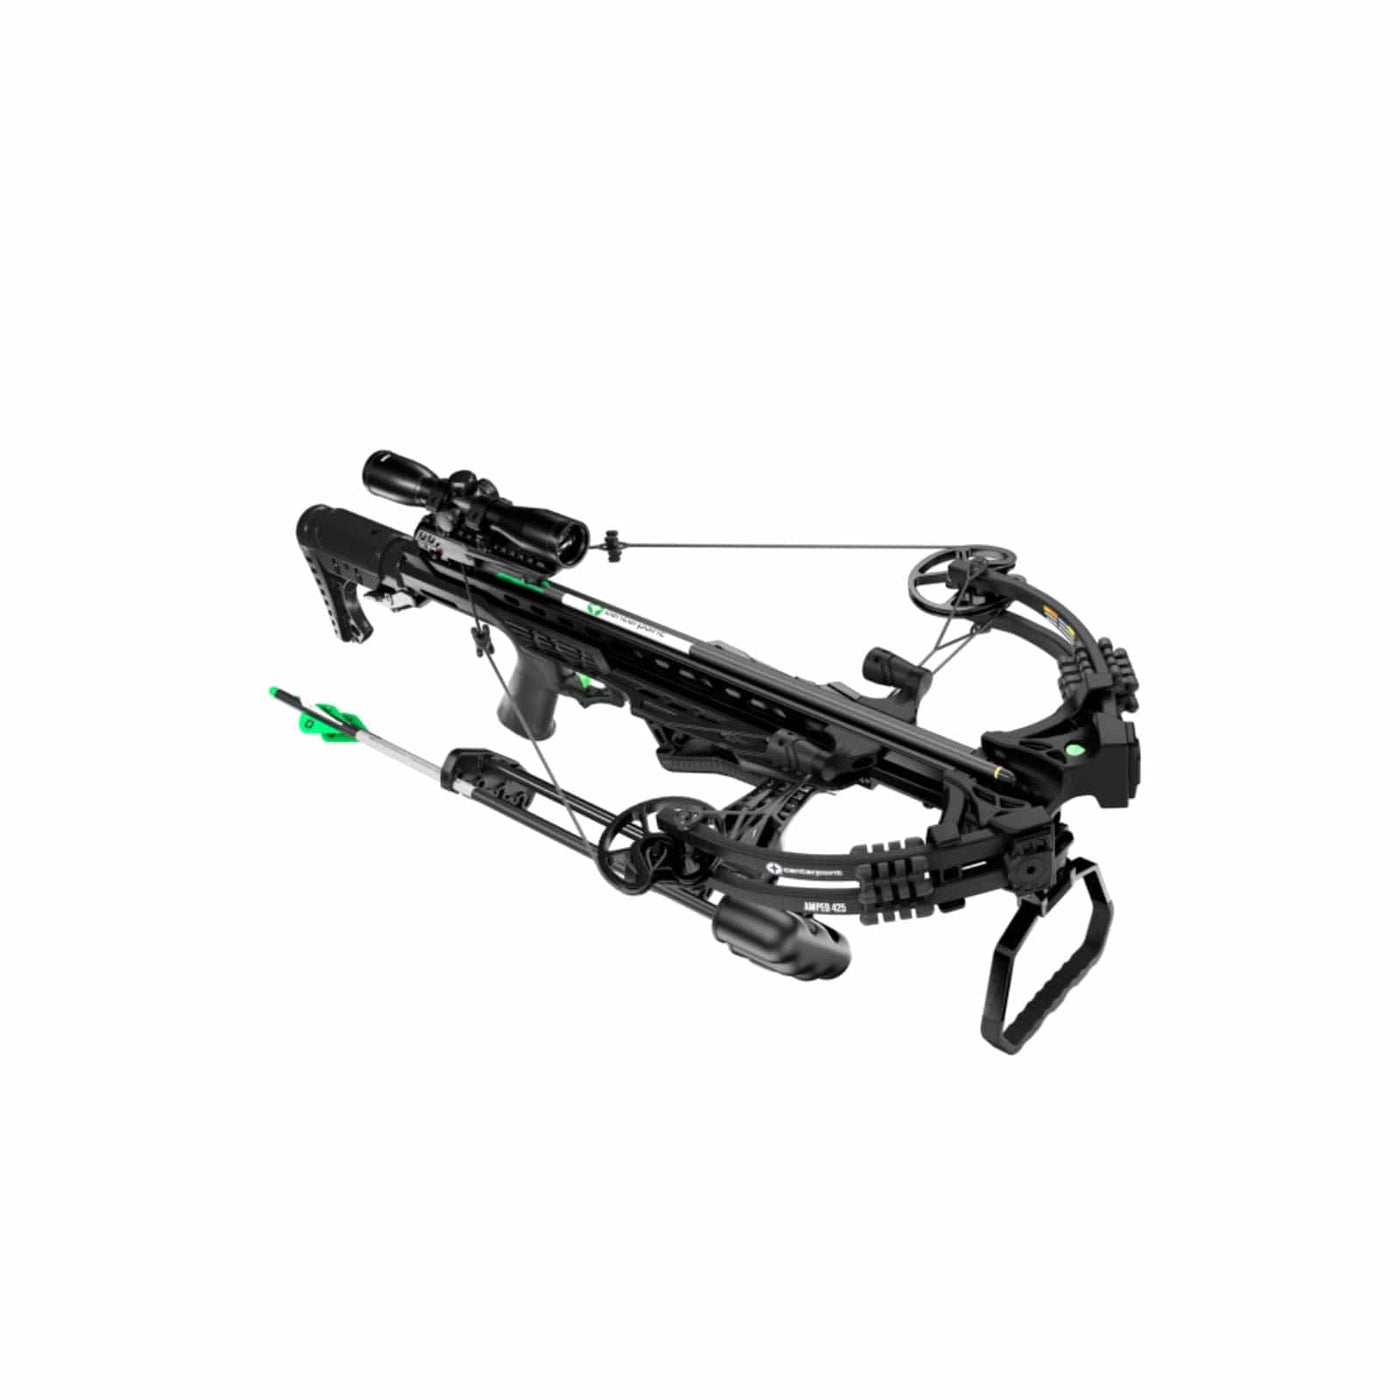 Centerpoint Centerpoint Amped 425 SC Crossbow Archery